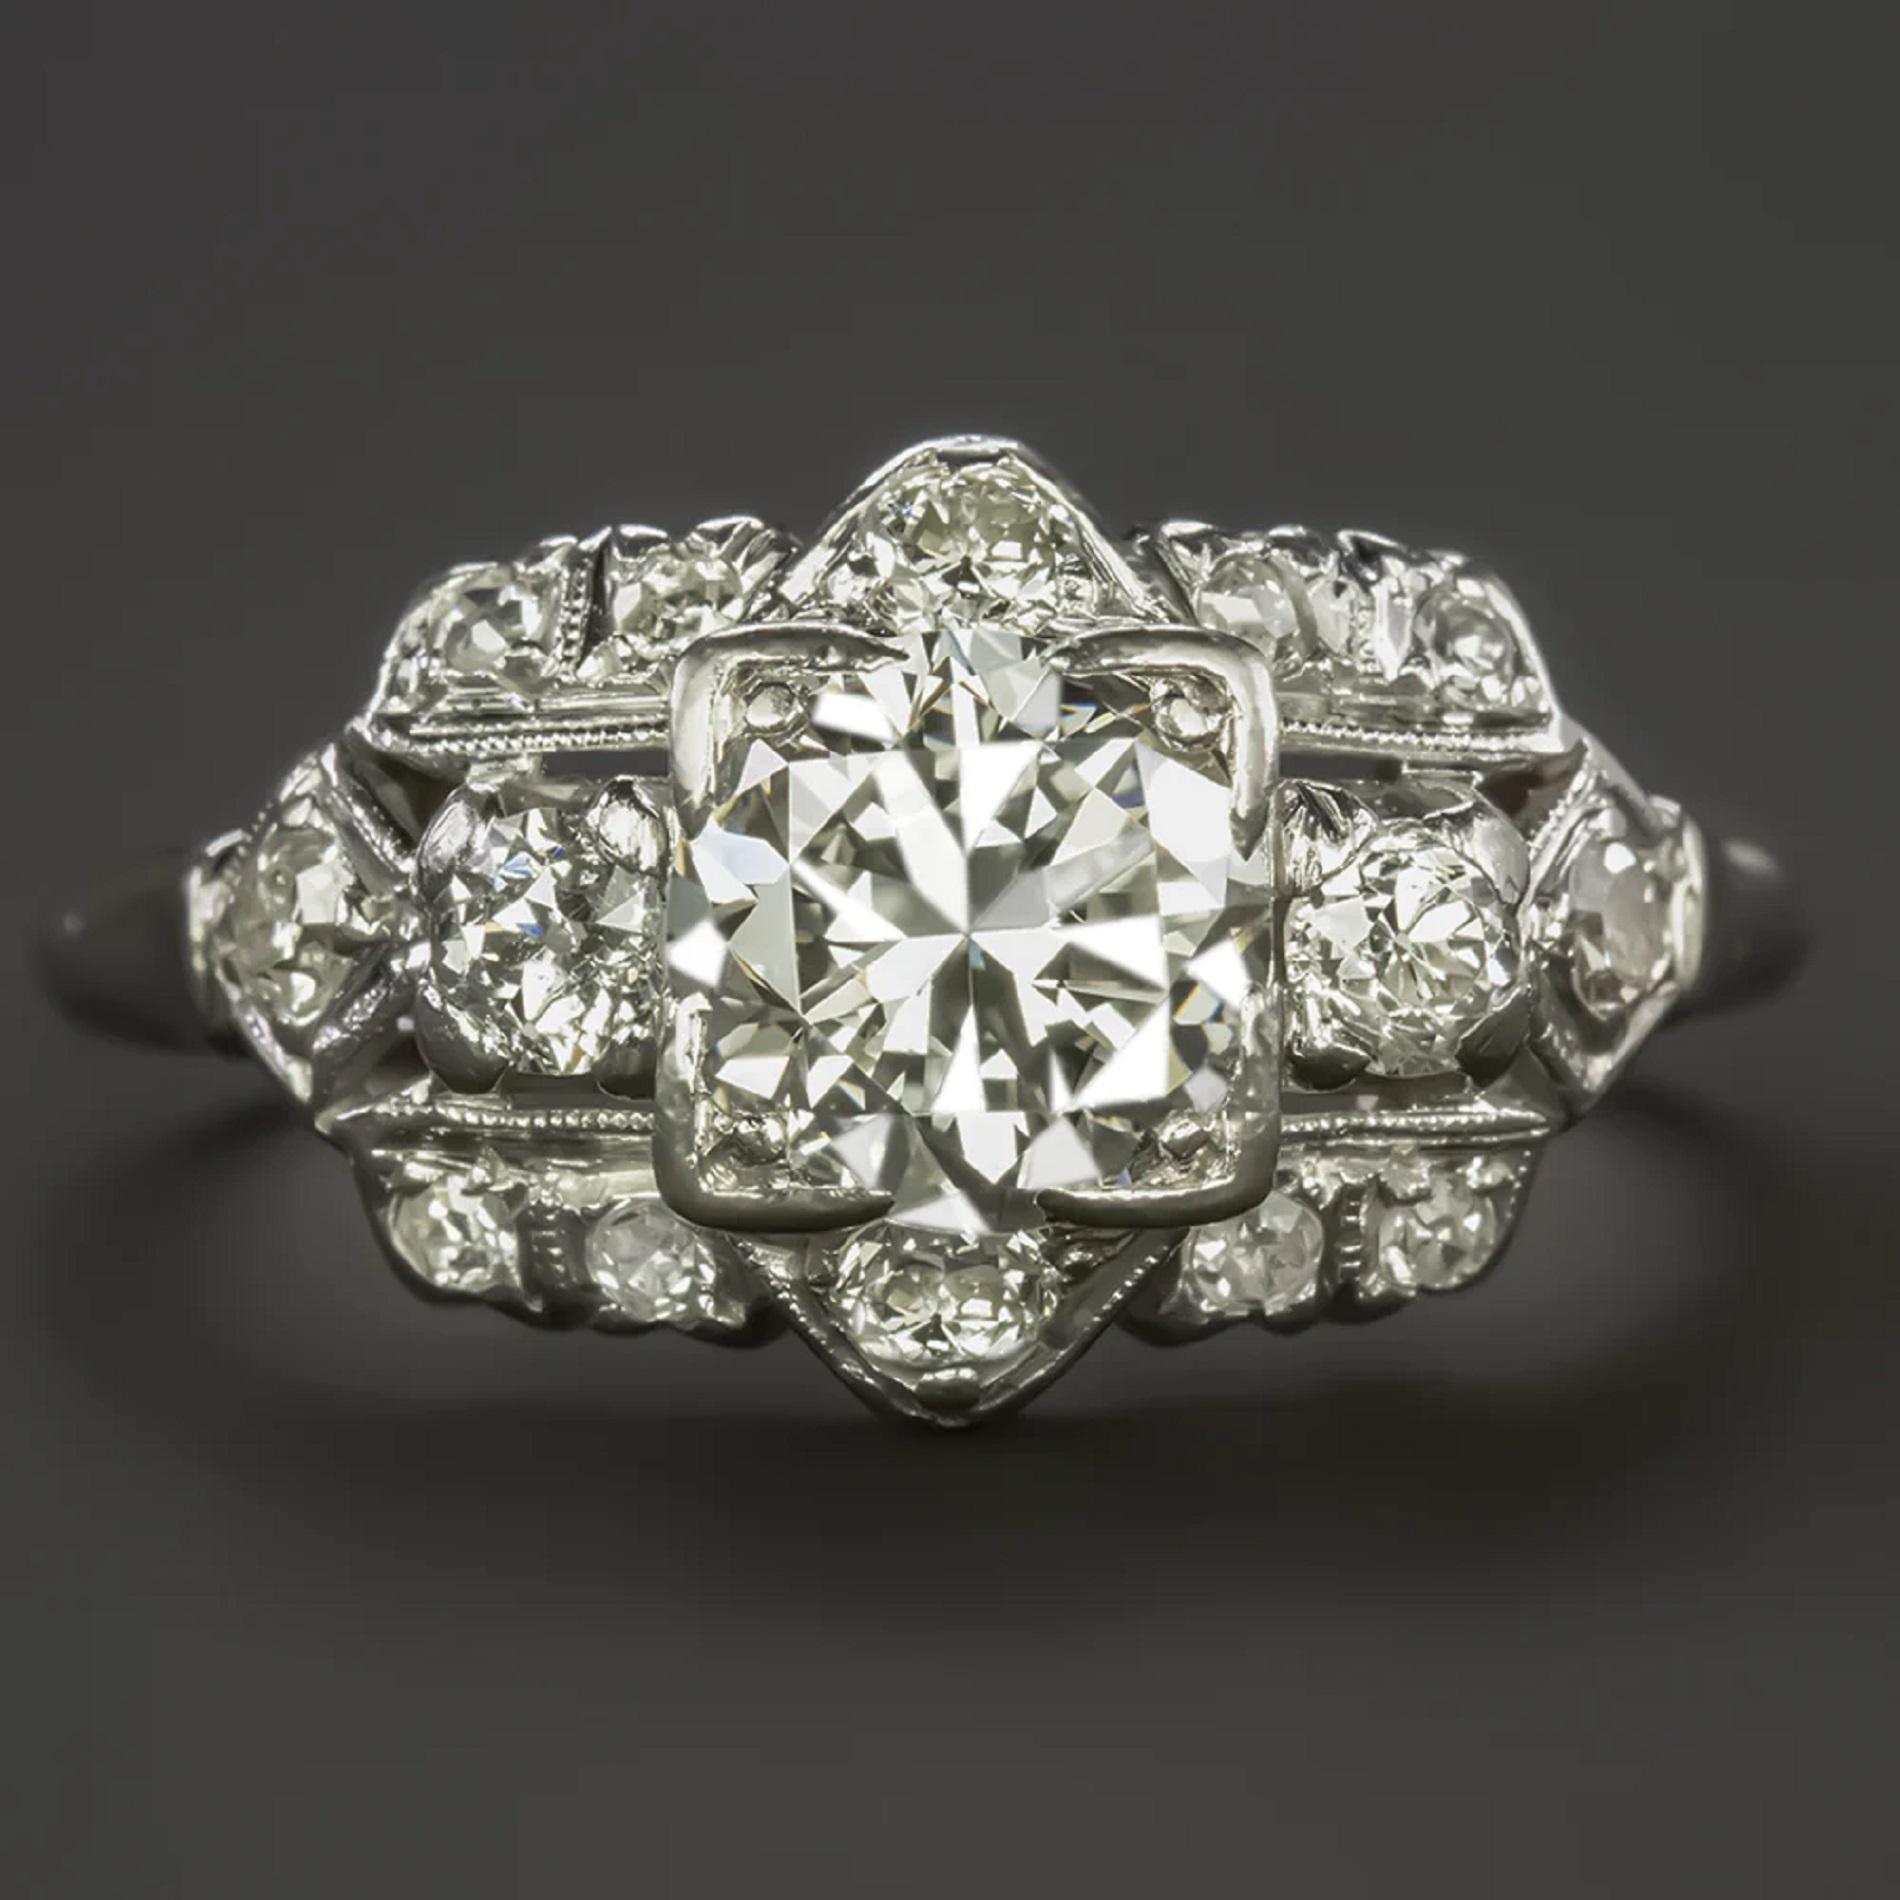 A gorgeous vintage diamond ring has a unique and elegant design with a gorgeous and high quality 1 carat diamond center, hand perfected geometric details, and a diamond encrusted face. Crafted in solid platinum, this is a very high quality piece